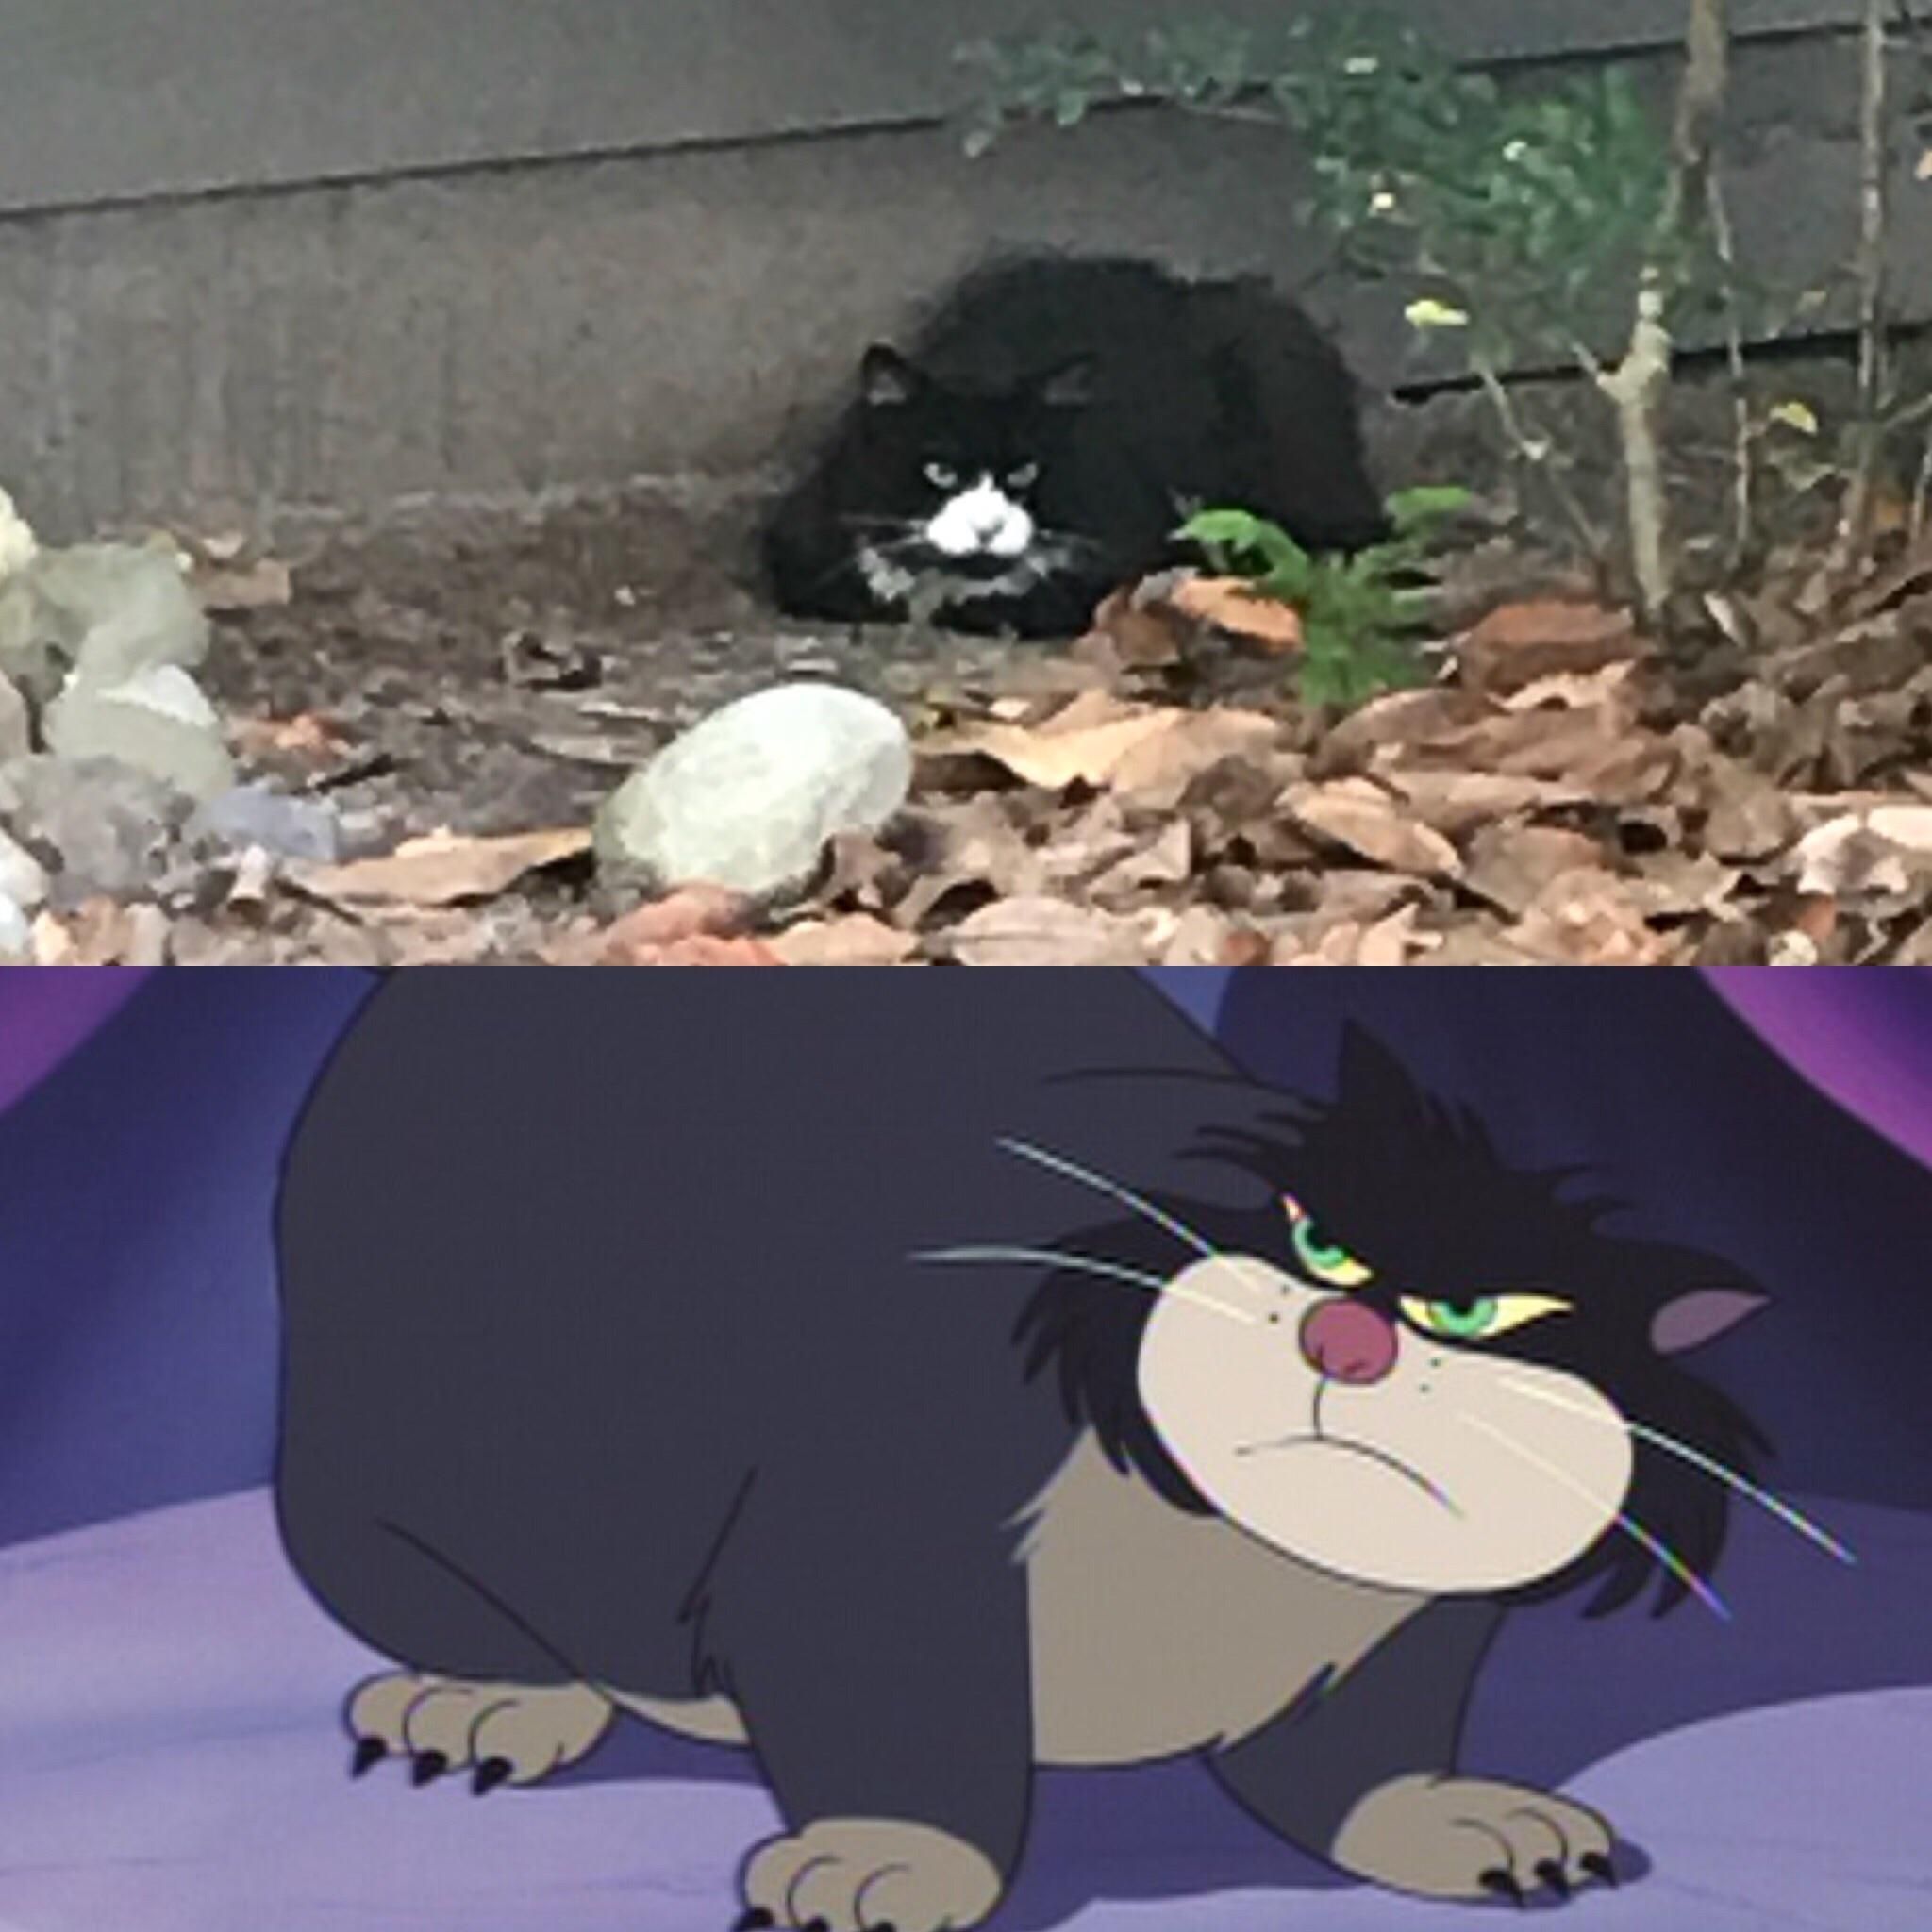 This neighborhood cat attacked my dog while we went for a walk. I thought he looked familiar...